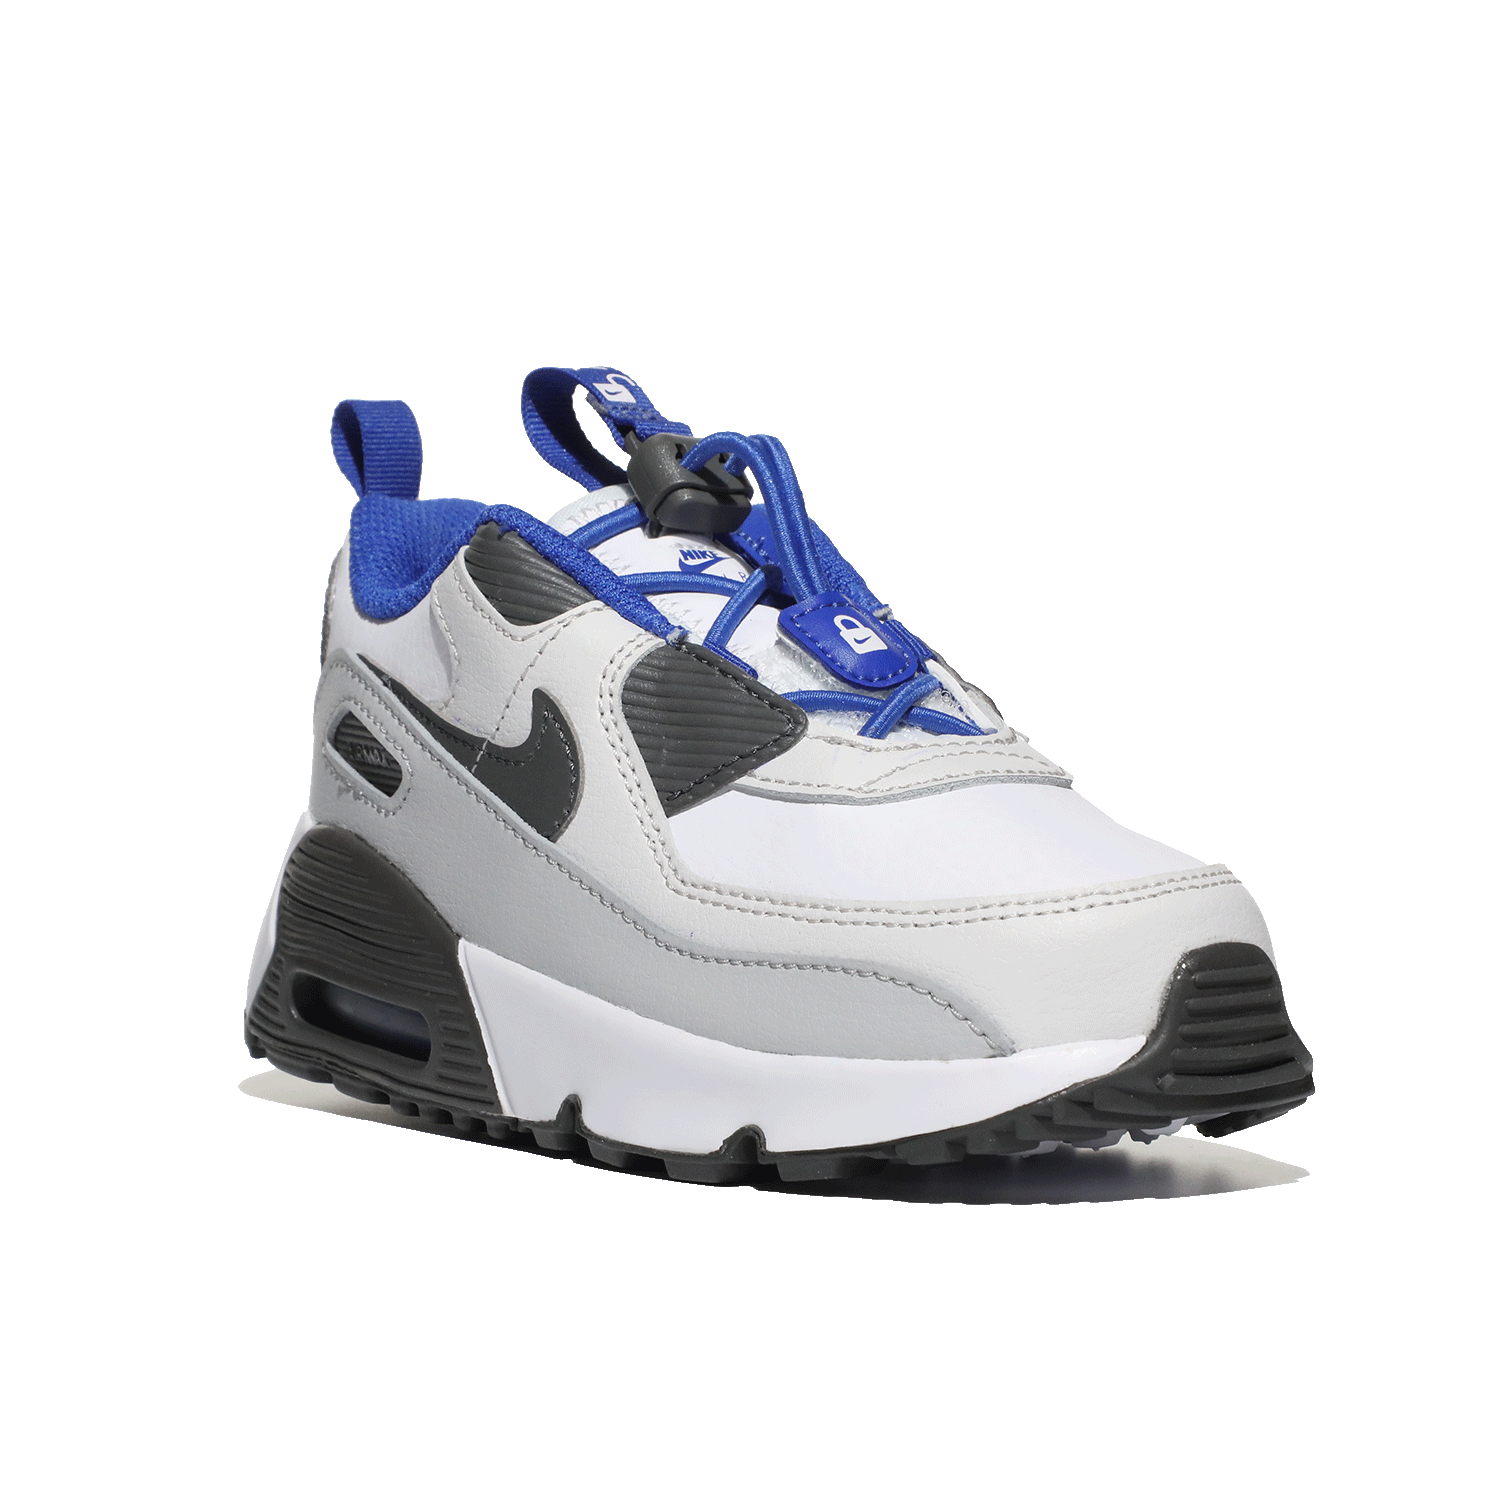 Image 7 of Air Max 90 Toggle (Infant/Toddler)